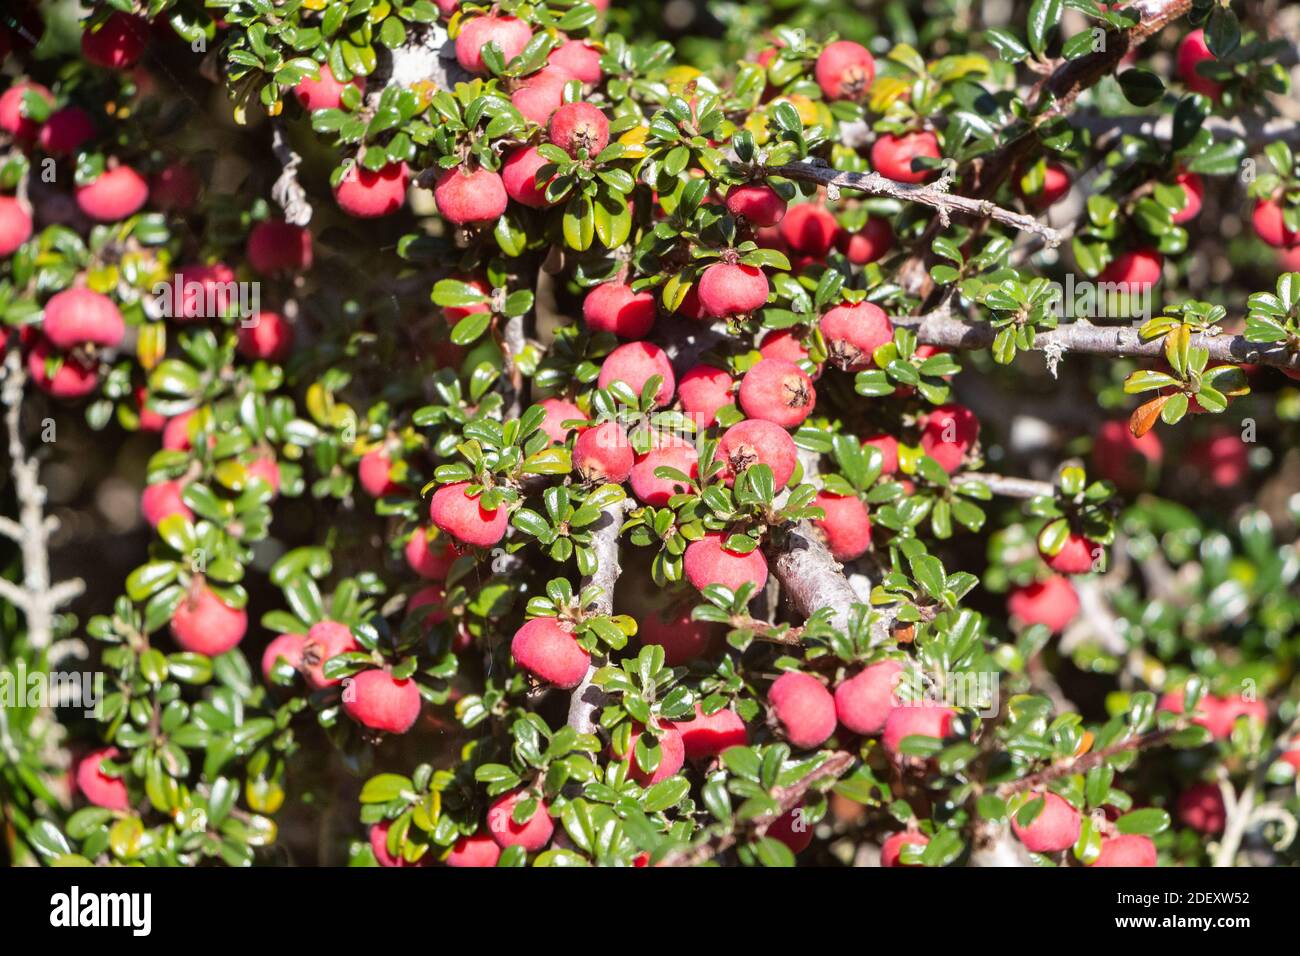 Plant of cotoneaster with red berries in a garden during summer Stock Photo